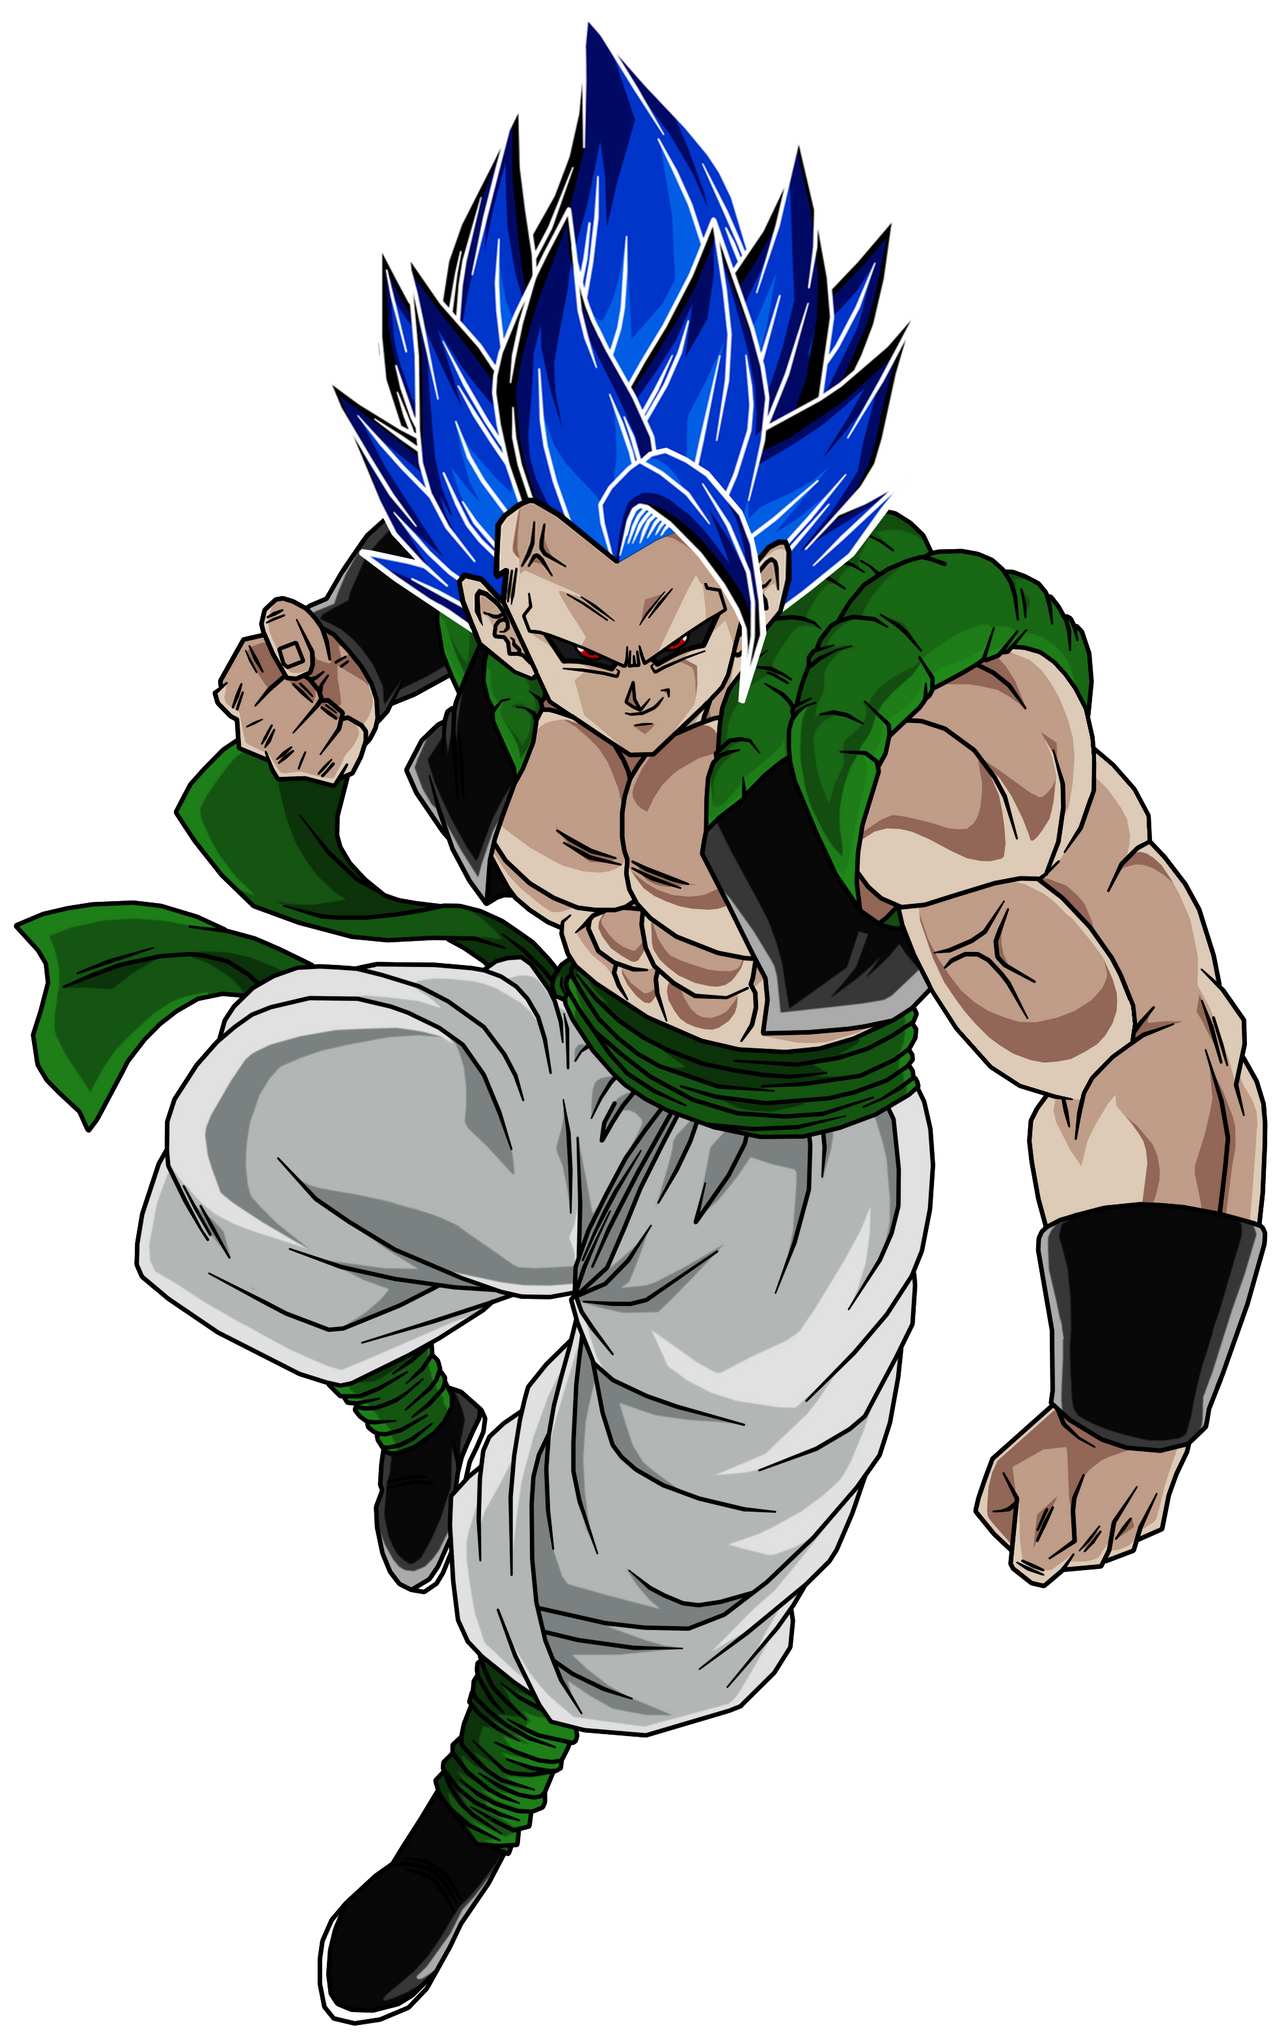 Pin by Gogeta<ssj7 on DBZ Posters, Sagas and fights,.